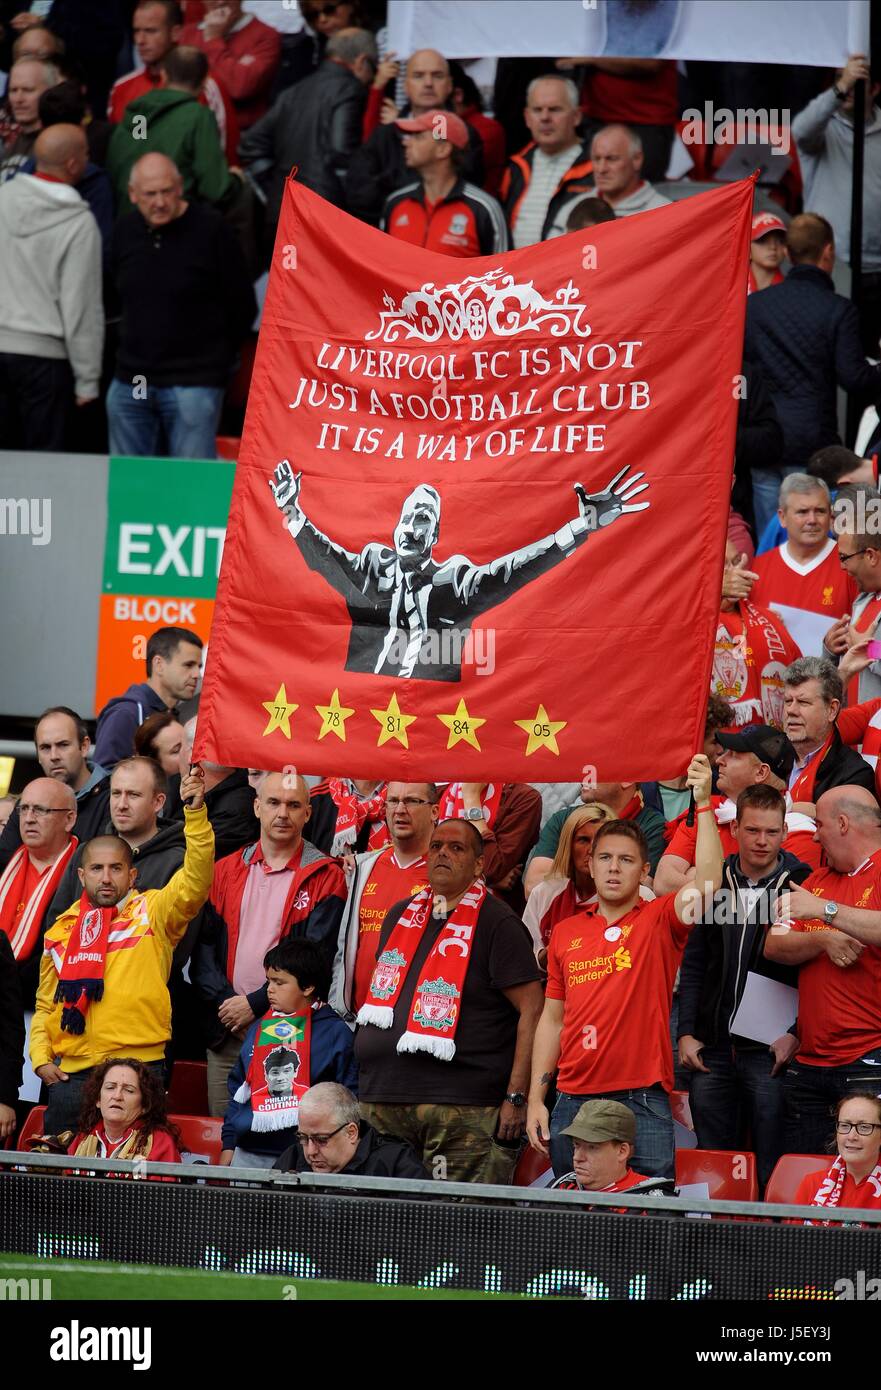 BILL SHANKLY FLAG LIVERPOOL V MANCHESTER UNITED ANFIELD LIVERPOOL ENGLAND 01 September 2013 Stock Photo